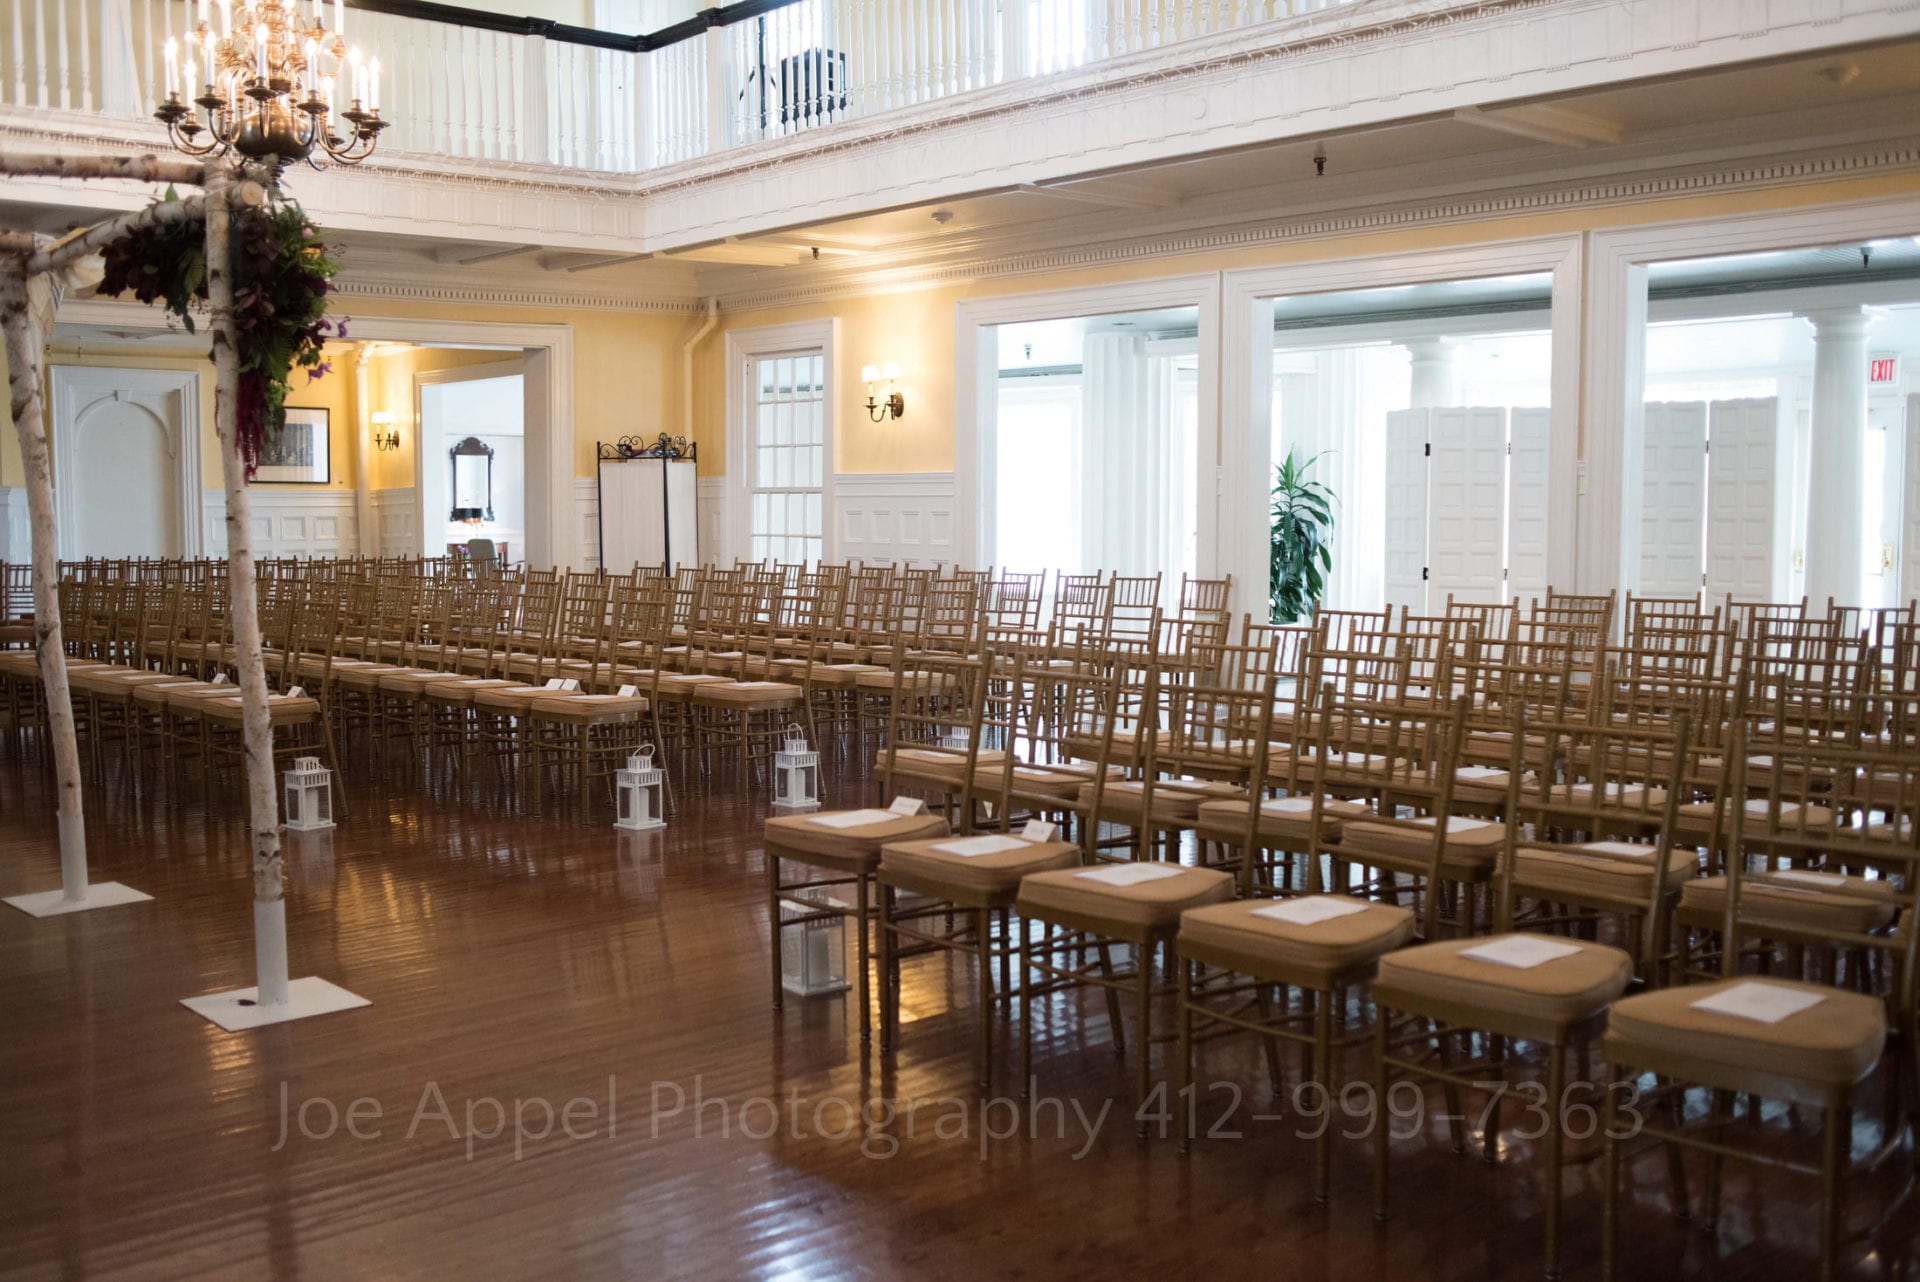 brown chairs with lanterns and an altar in a white room